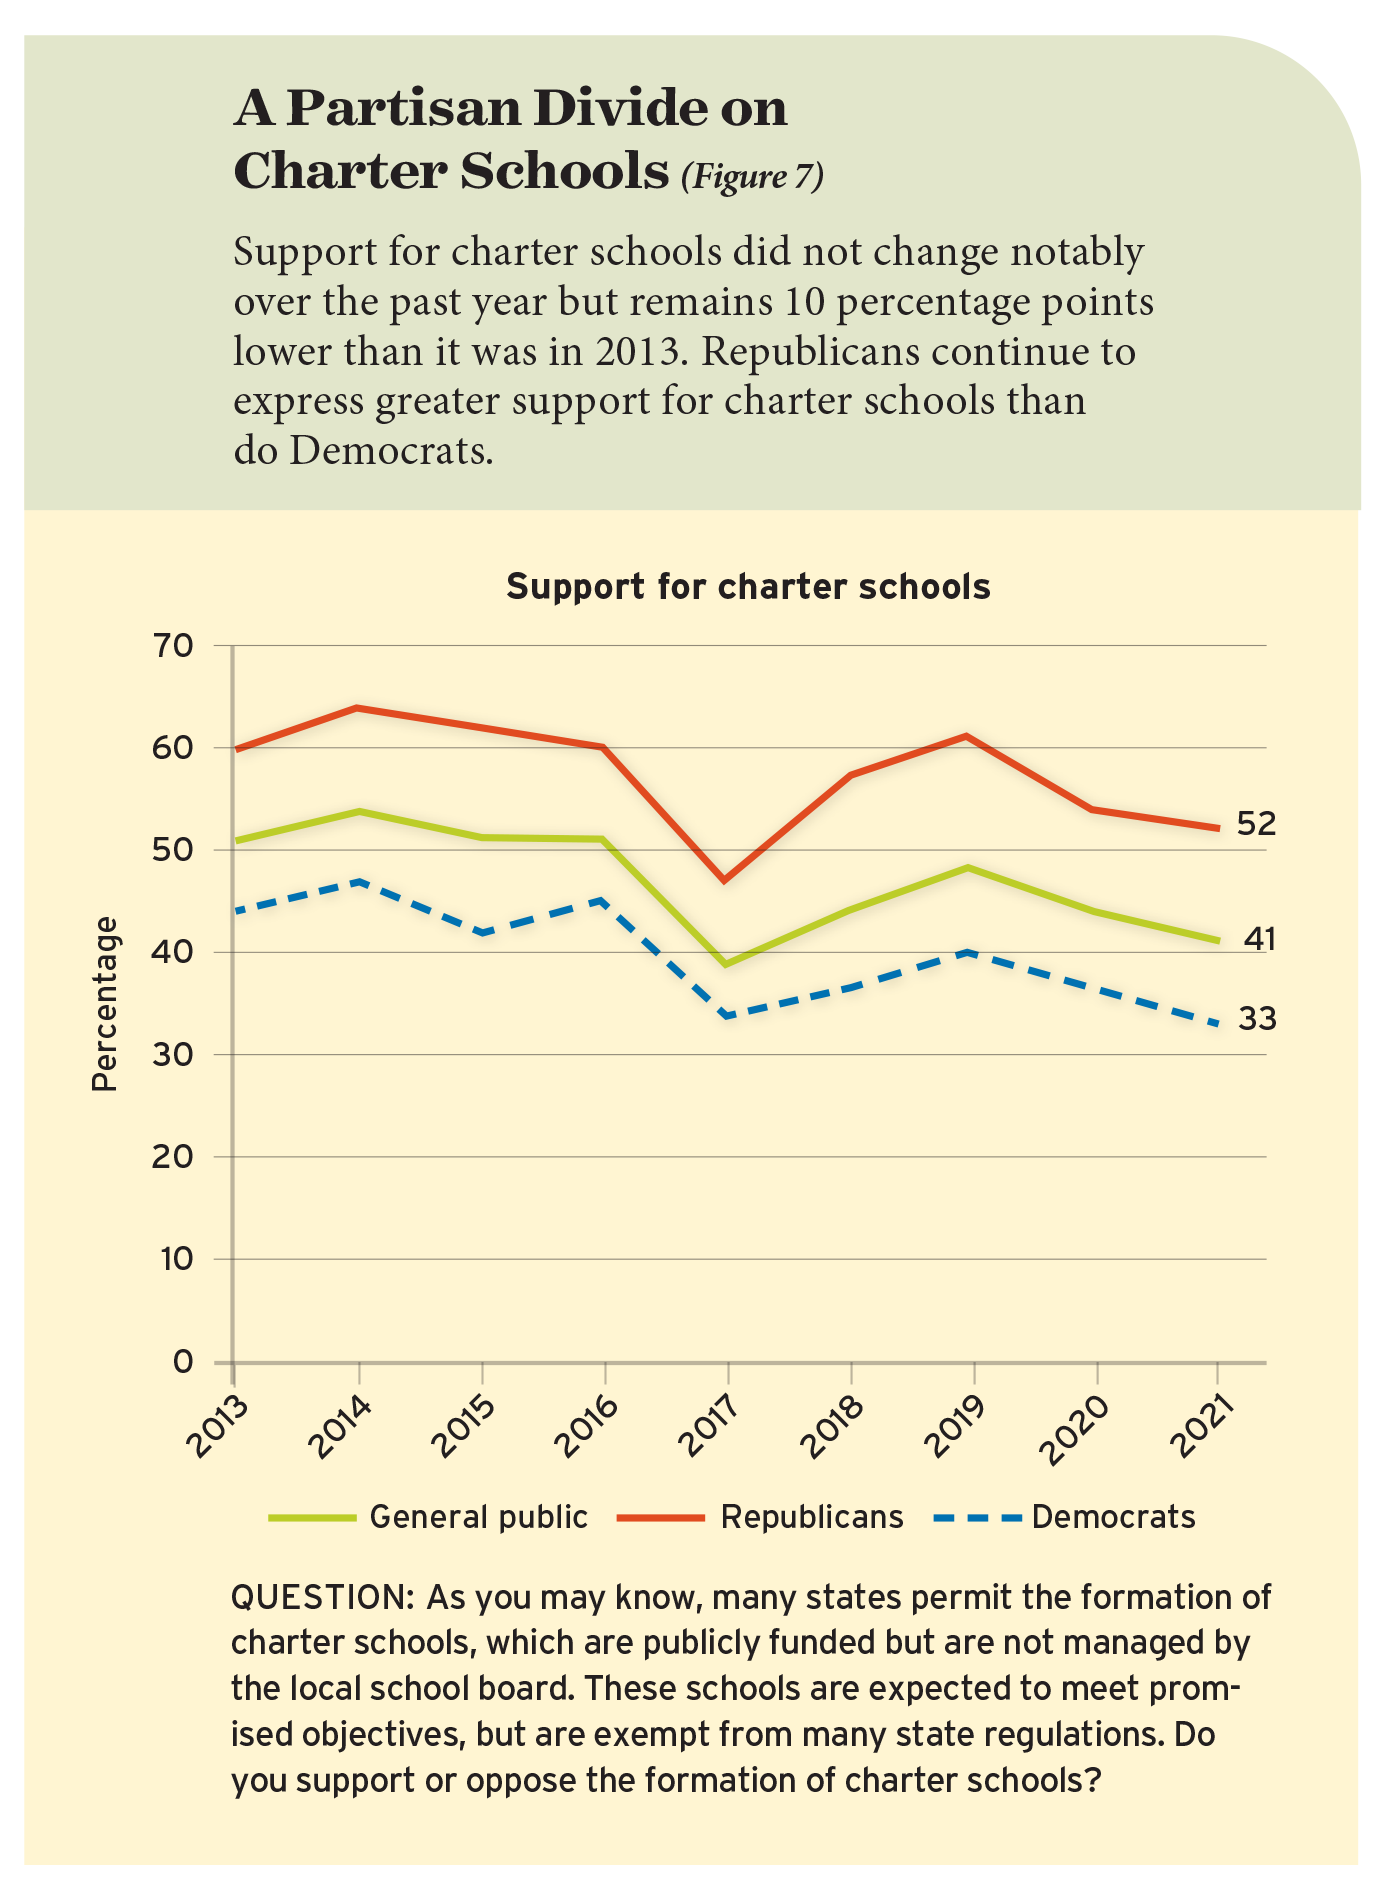 A Partisan Divide on Charter Schools (Figure 7)